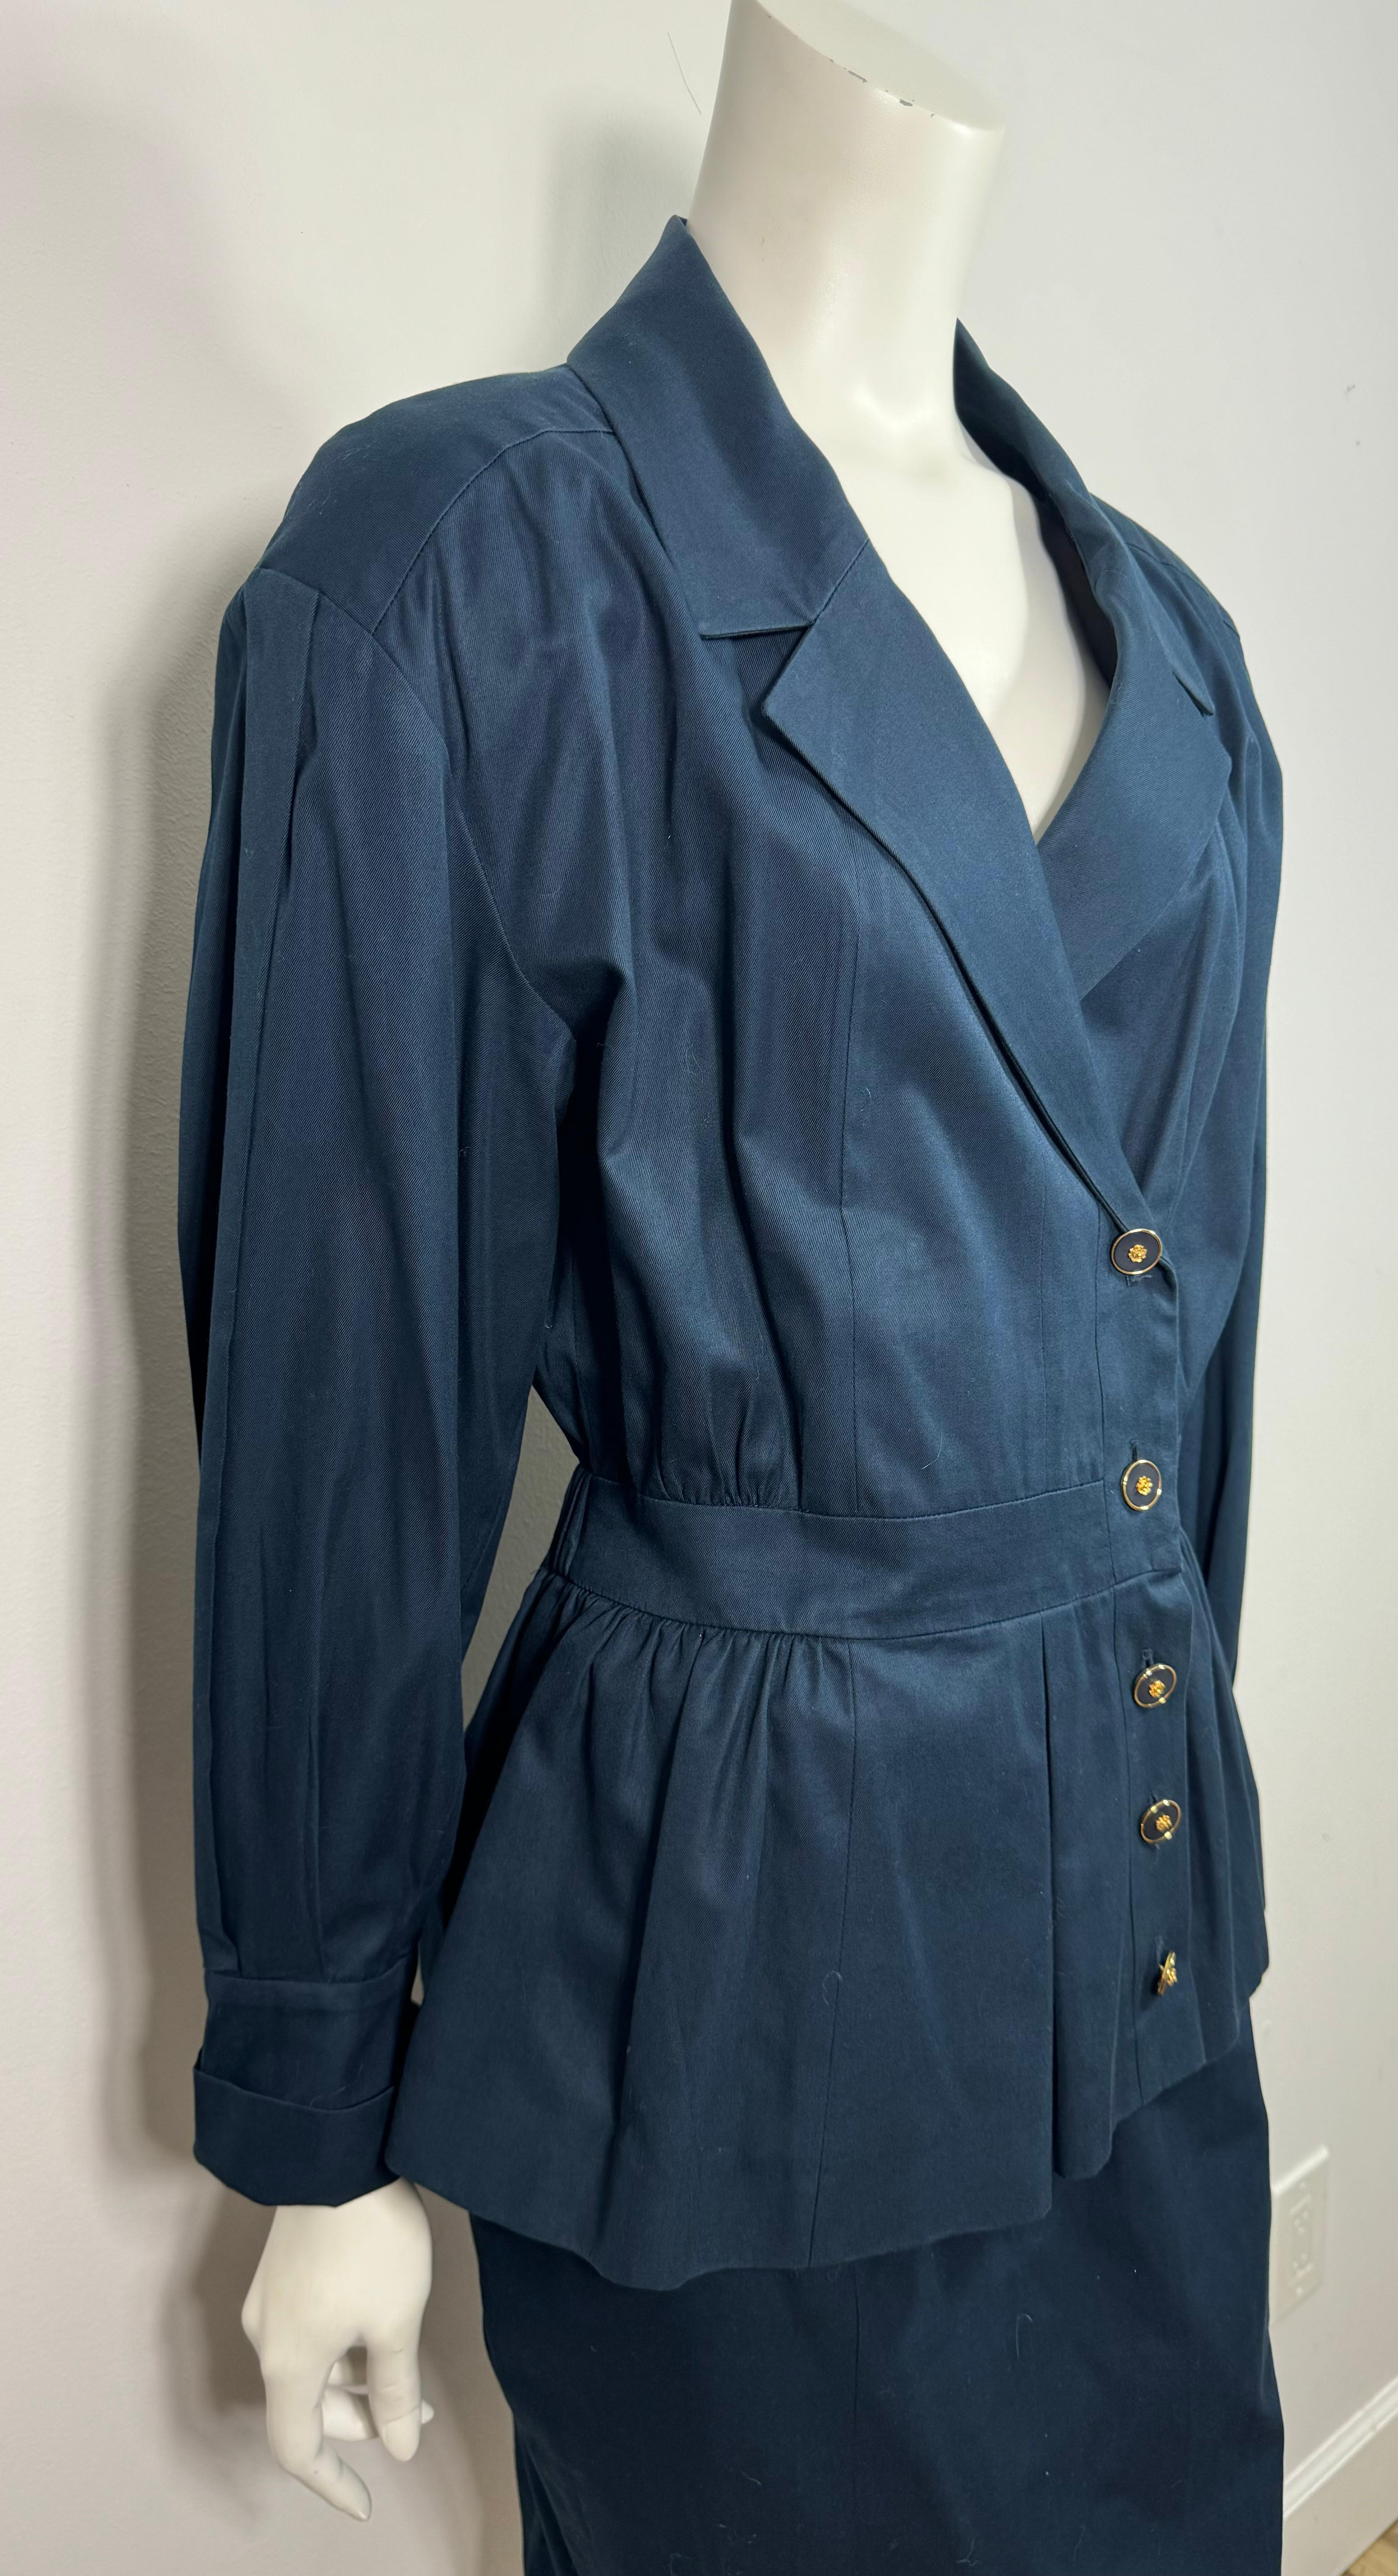 Chanel 1980's Navy Cotton Cinched Waist Jacket Skirt Suit - Size 38 For Sale 3